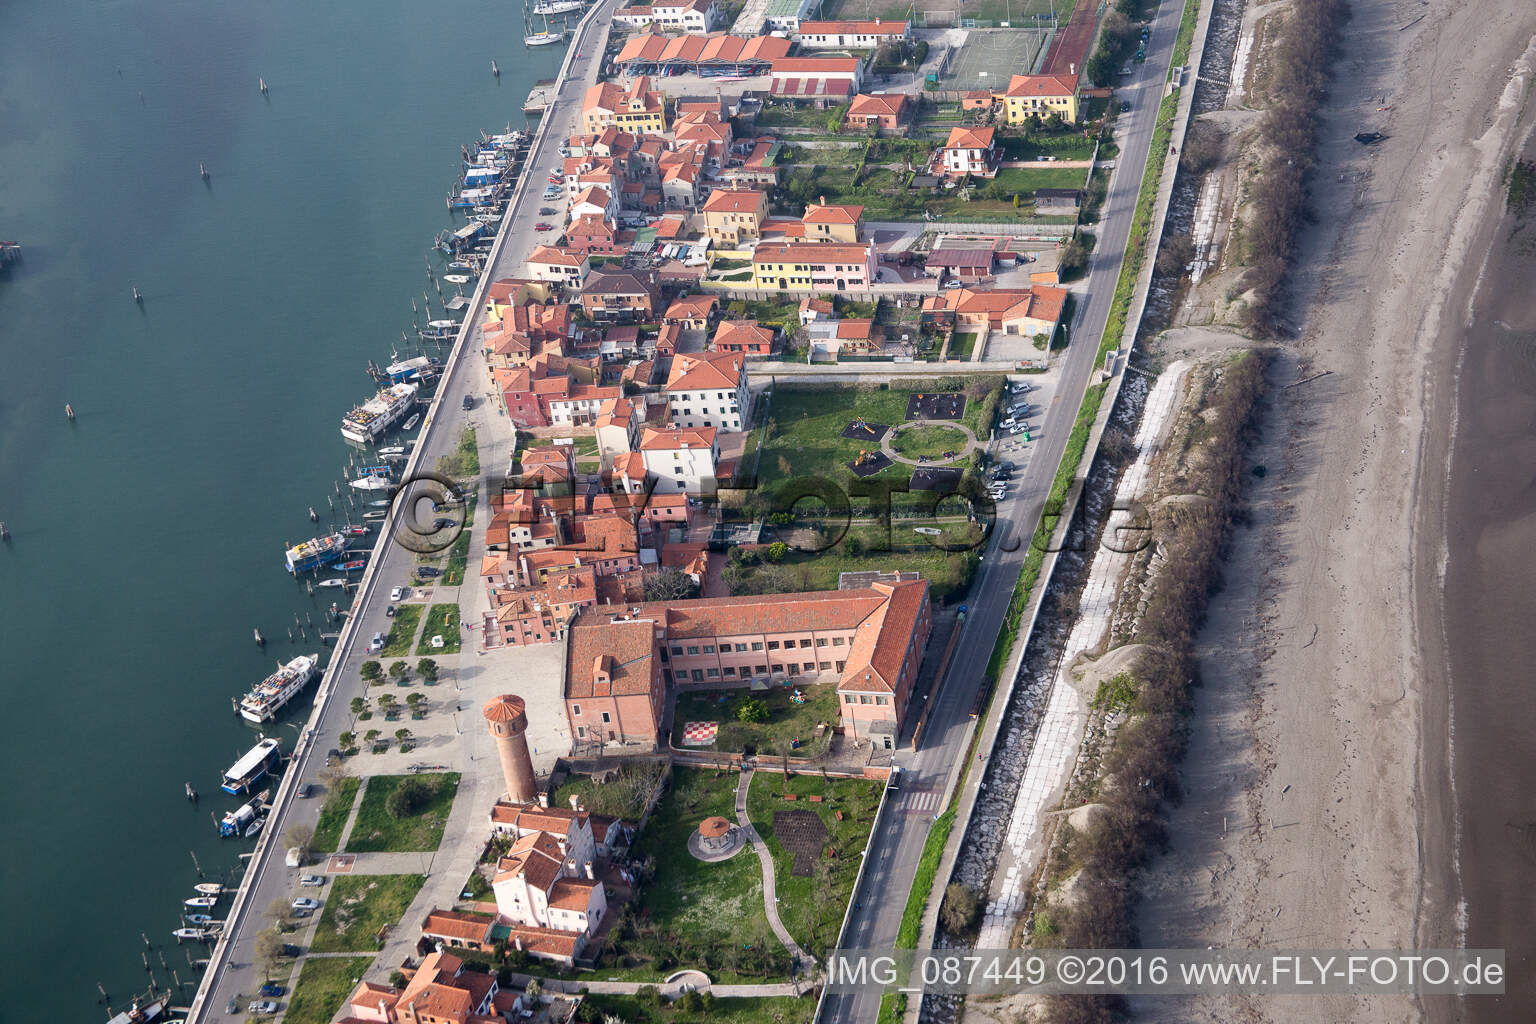 Aerial photograpy of Settlement area in the district Pellestrina in Venedig in Venetien, Italy